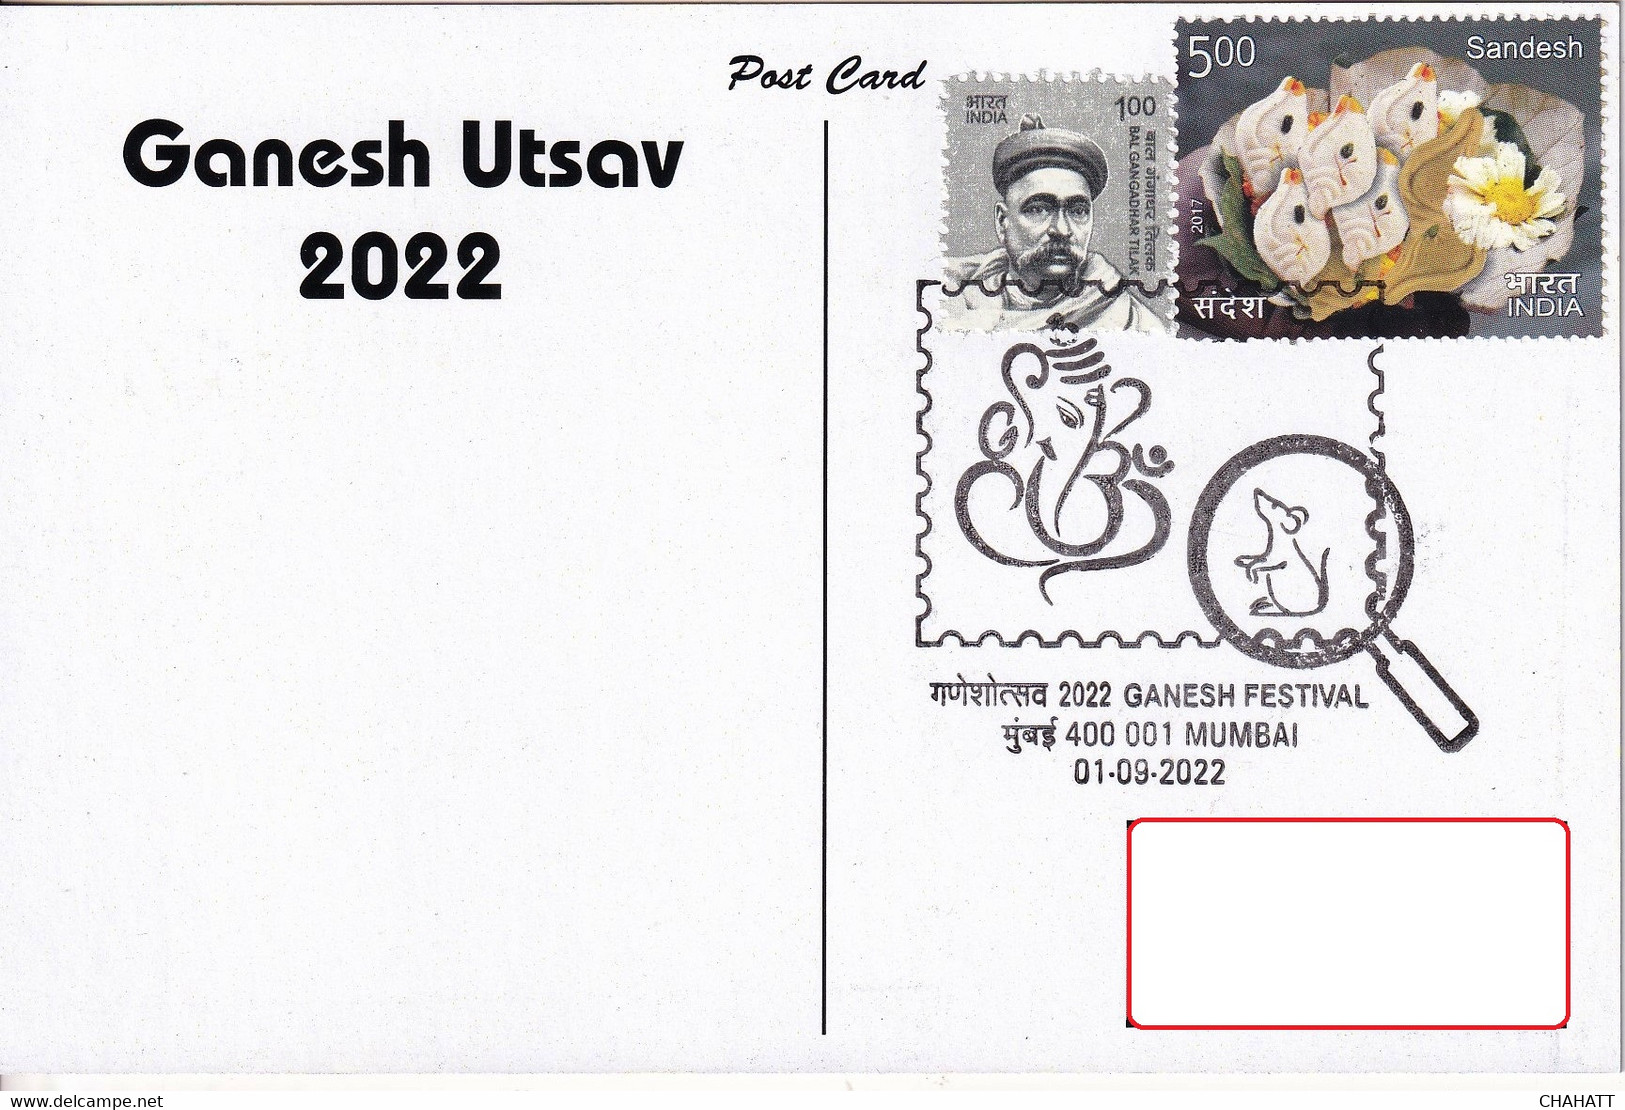 HINDUISM - LORD GANESHA - FESTIVAL -PPC WITH PICTORIAL CANCEL -#6 OF 15 -INDIA-2022- NMC2-35 - Hinduismo